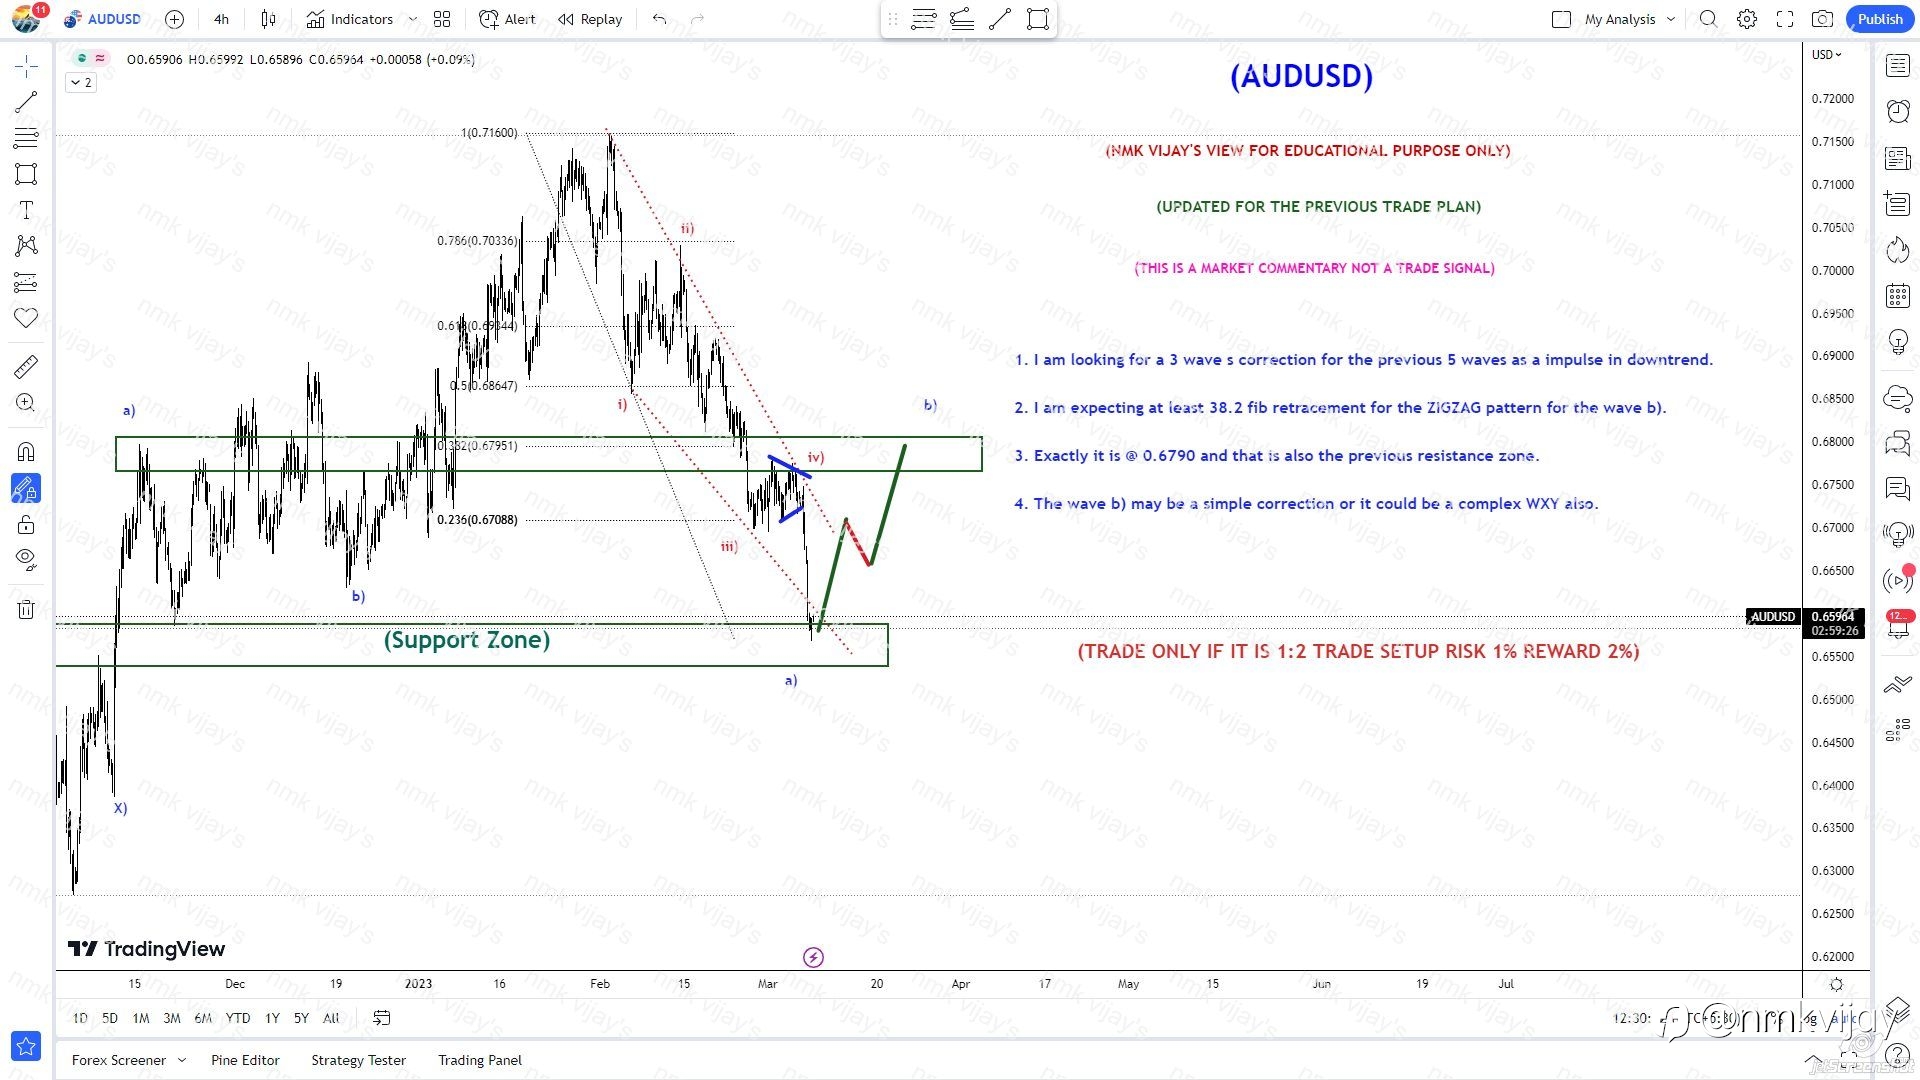 AUD-USD Looking for 3 waves for wave b) to 0.6790